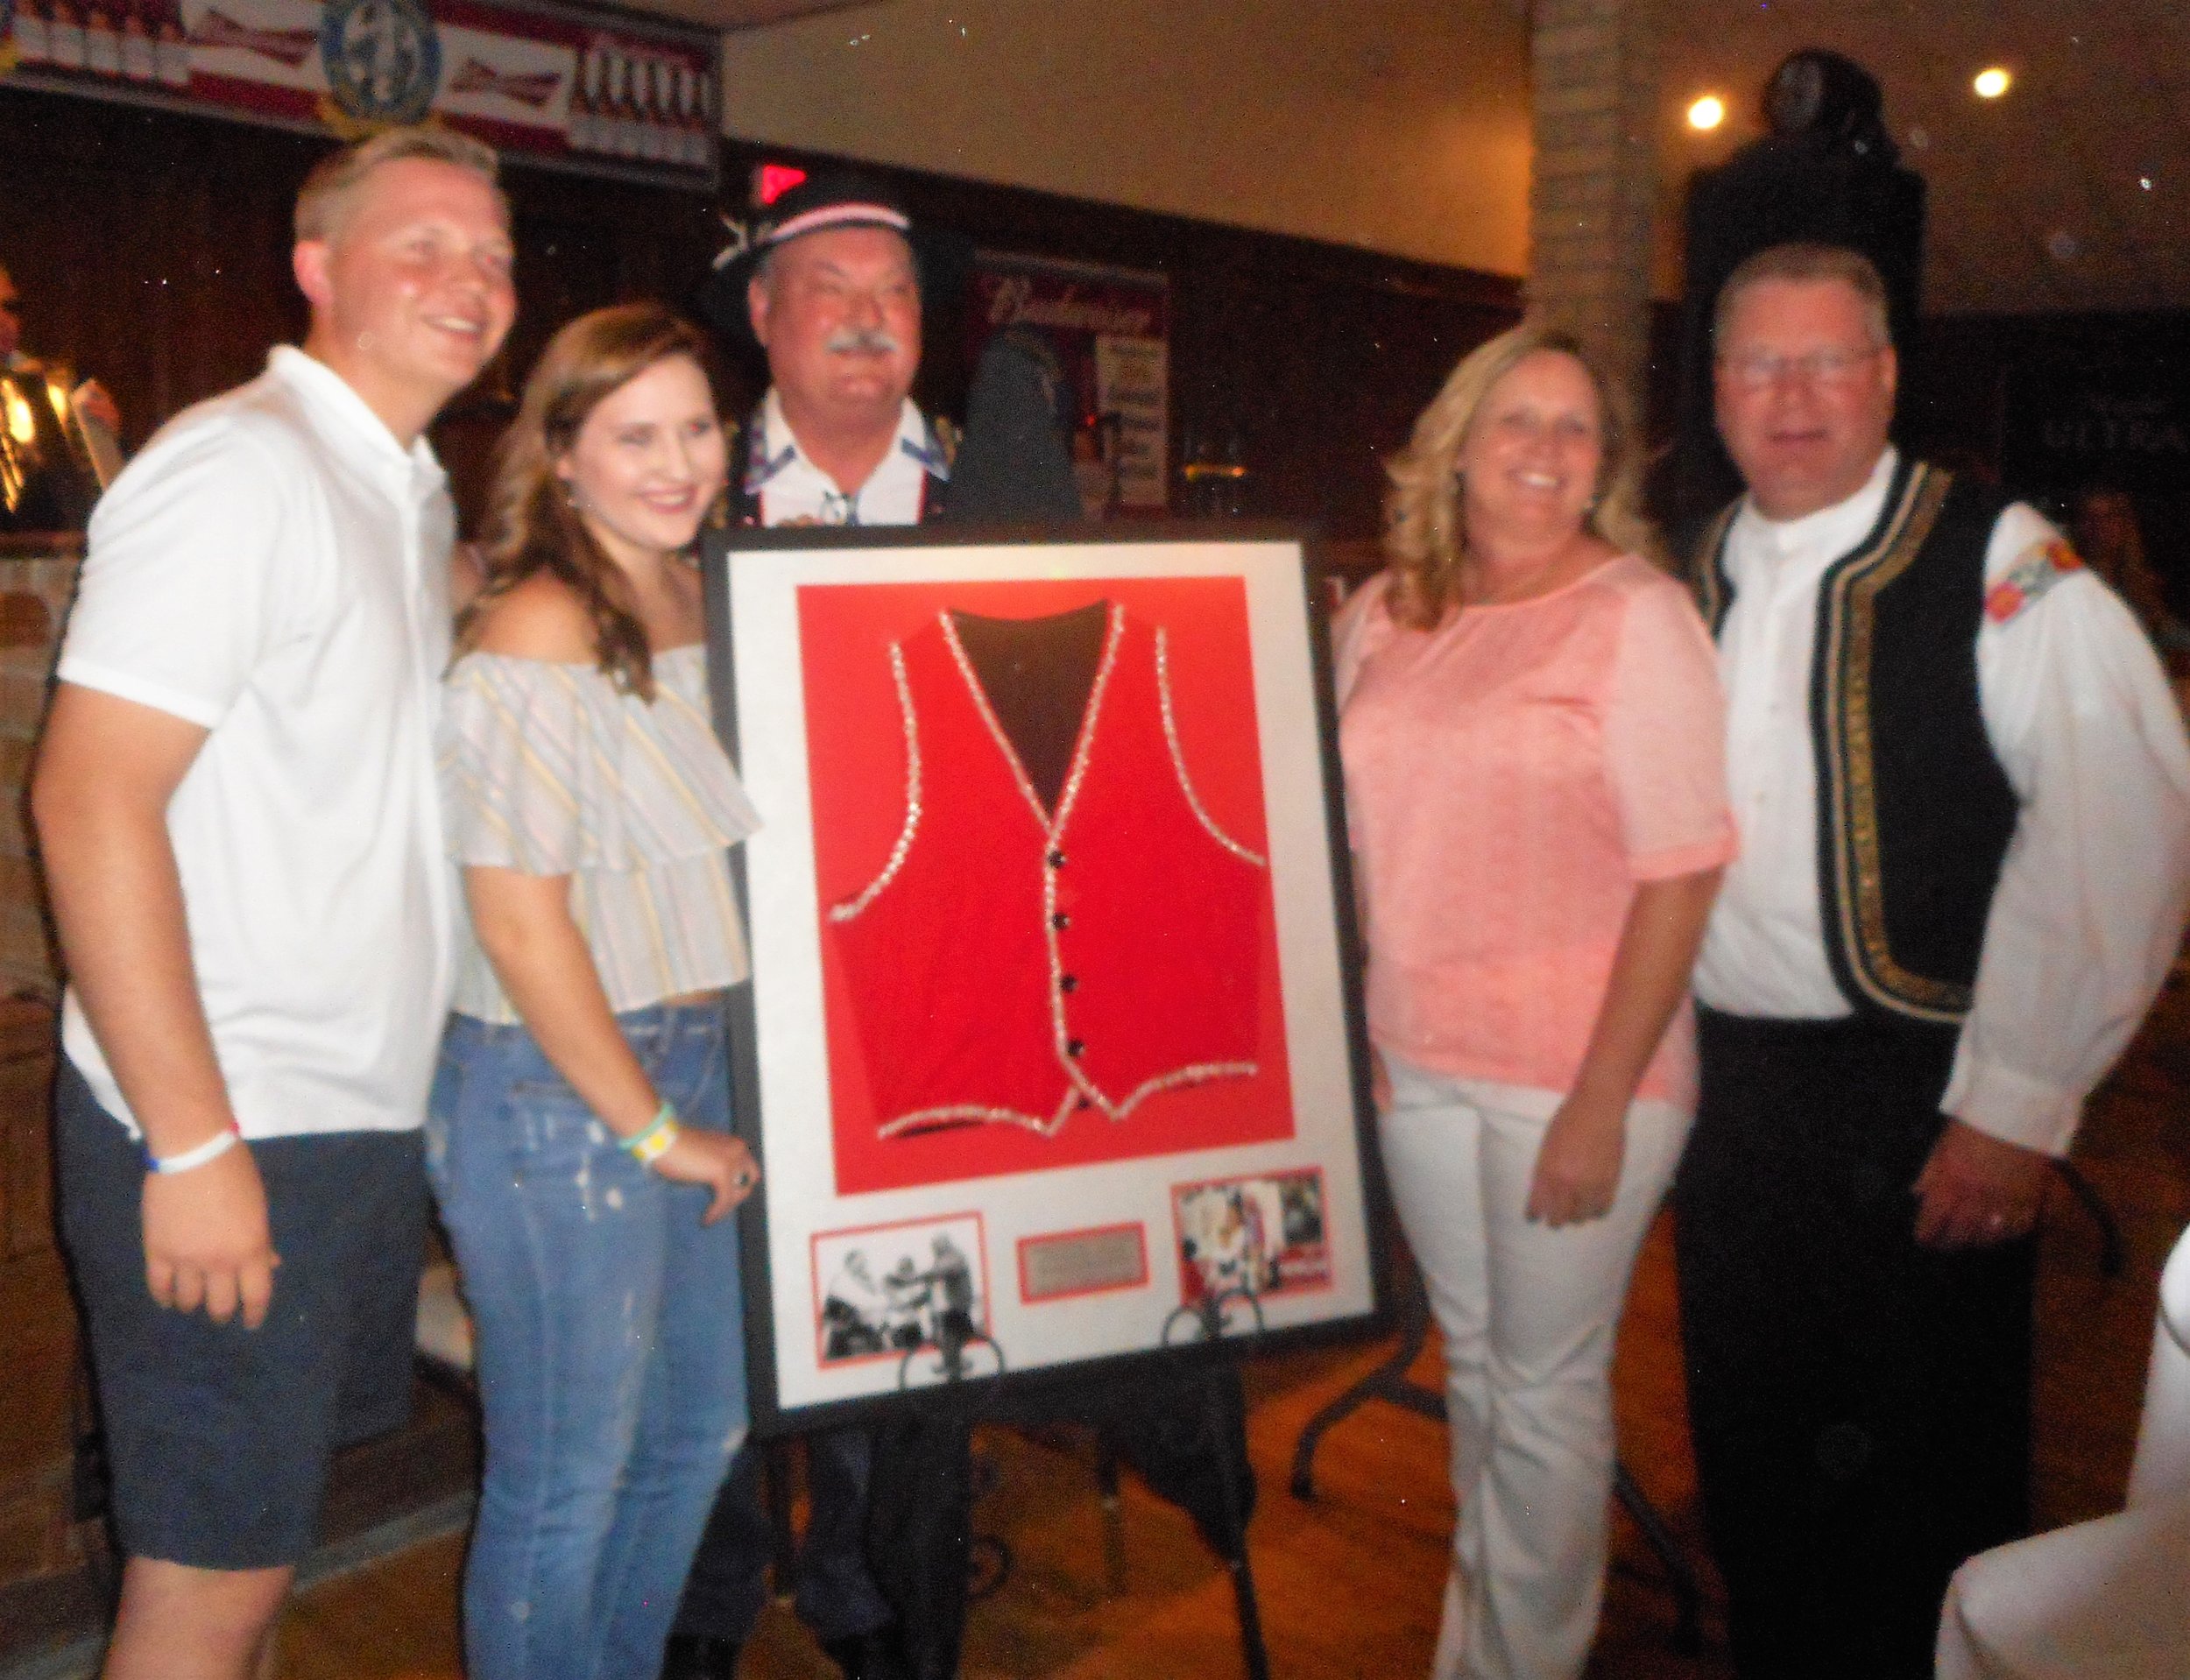 DZ, surrounded by family, was honored at 2016 National Polka Festival for serving as director. Former Ennis mayor Russell Thomas presented DZ with a framed vest that belonged to his dad.